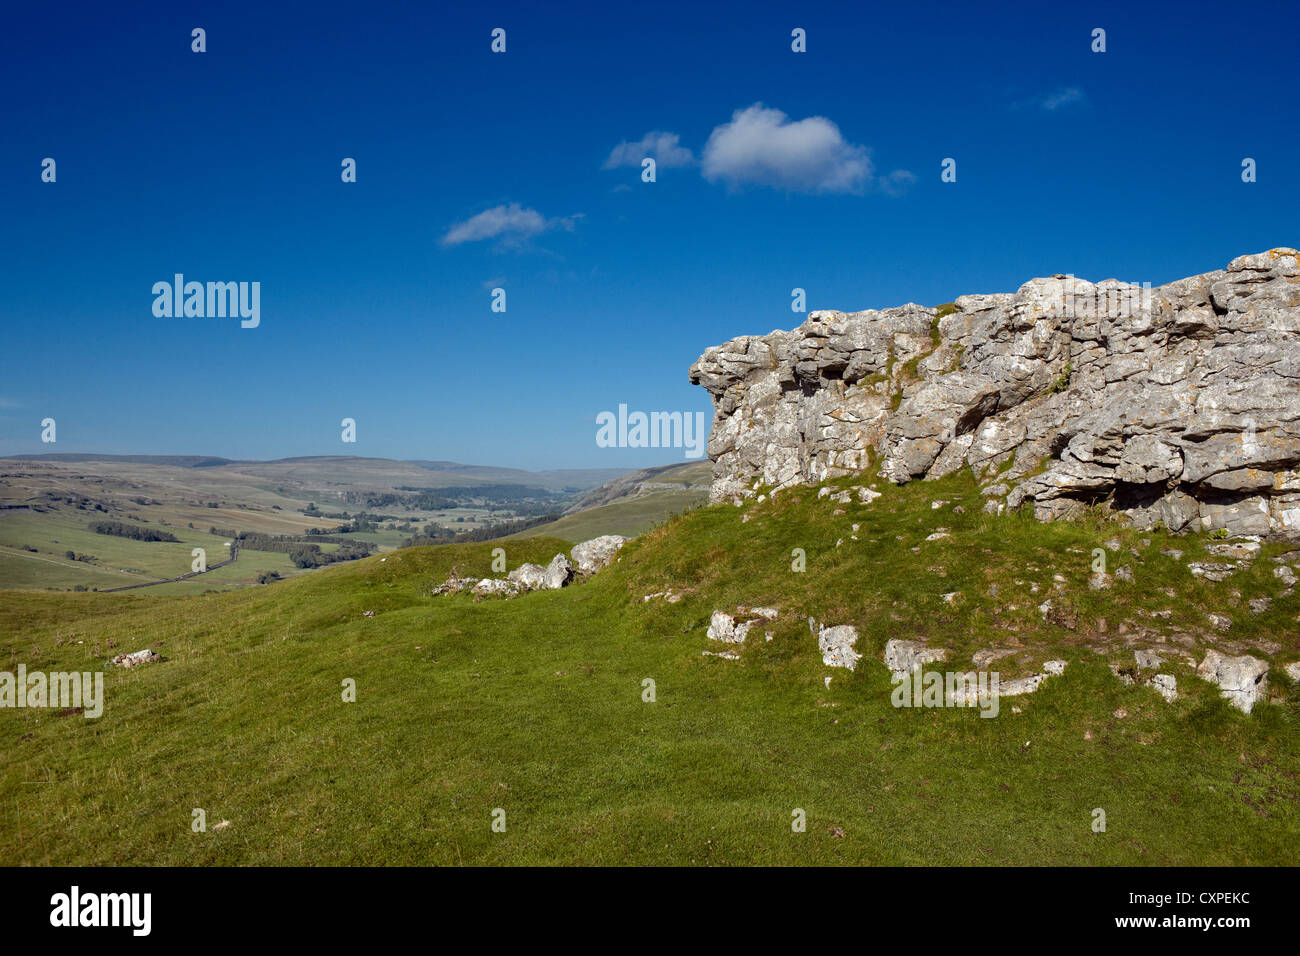 Conistone Pie, a limestone outcrop in Upper Wharfedale close to the Dales Way Footpath Stock Photo